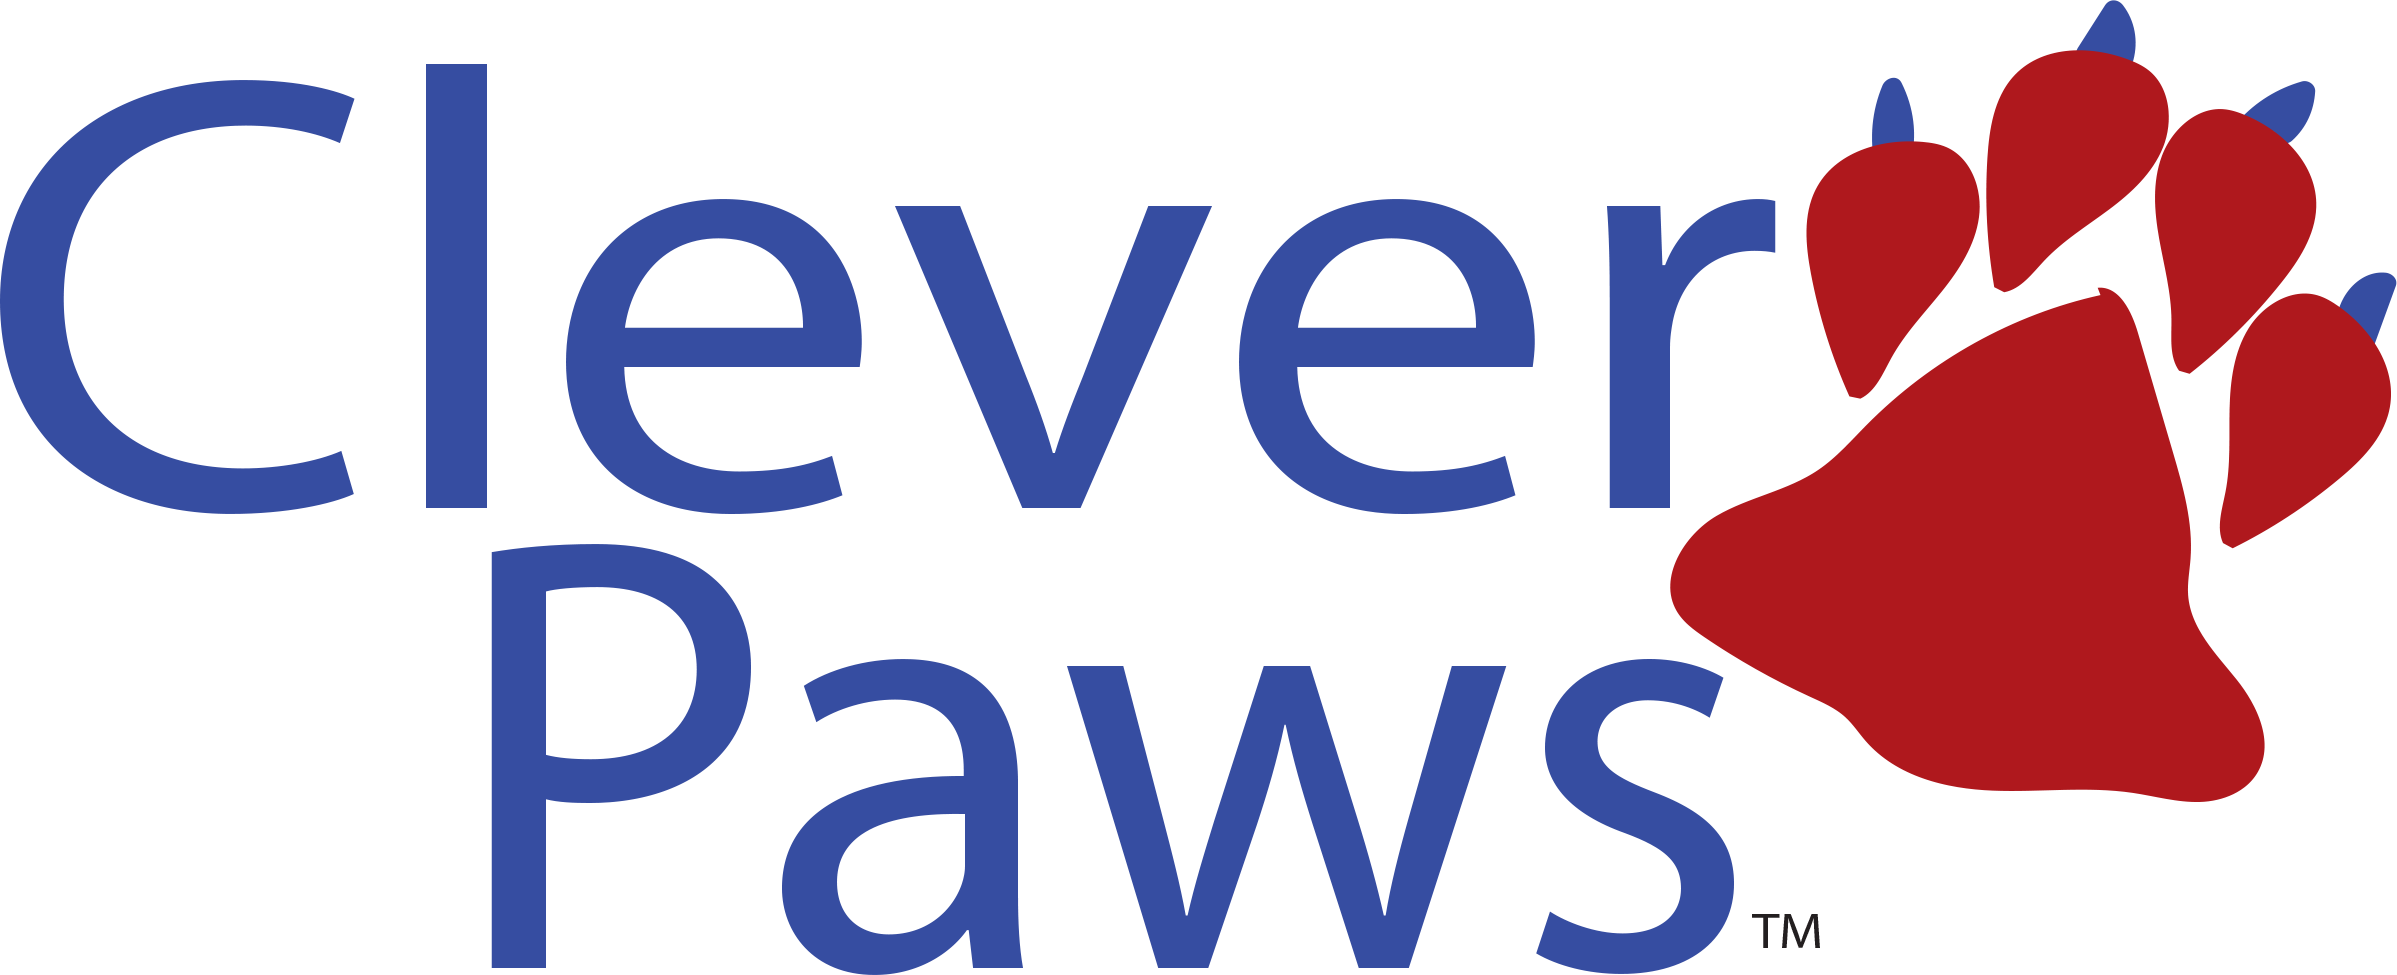 Clever Paws